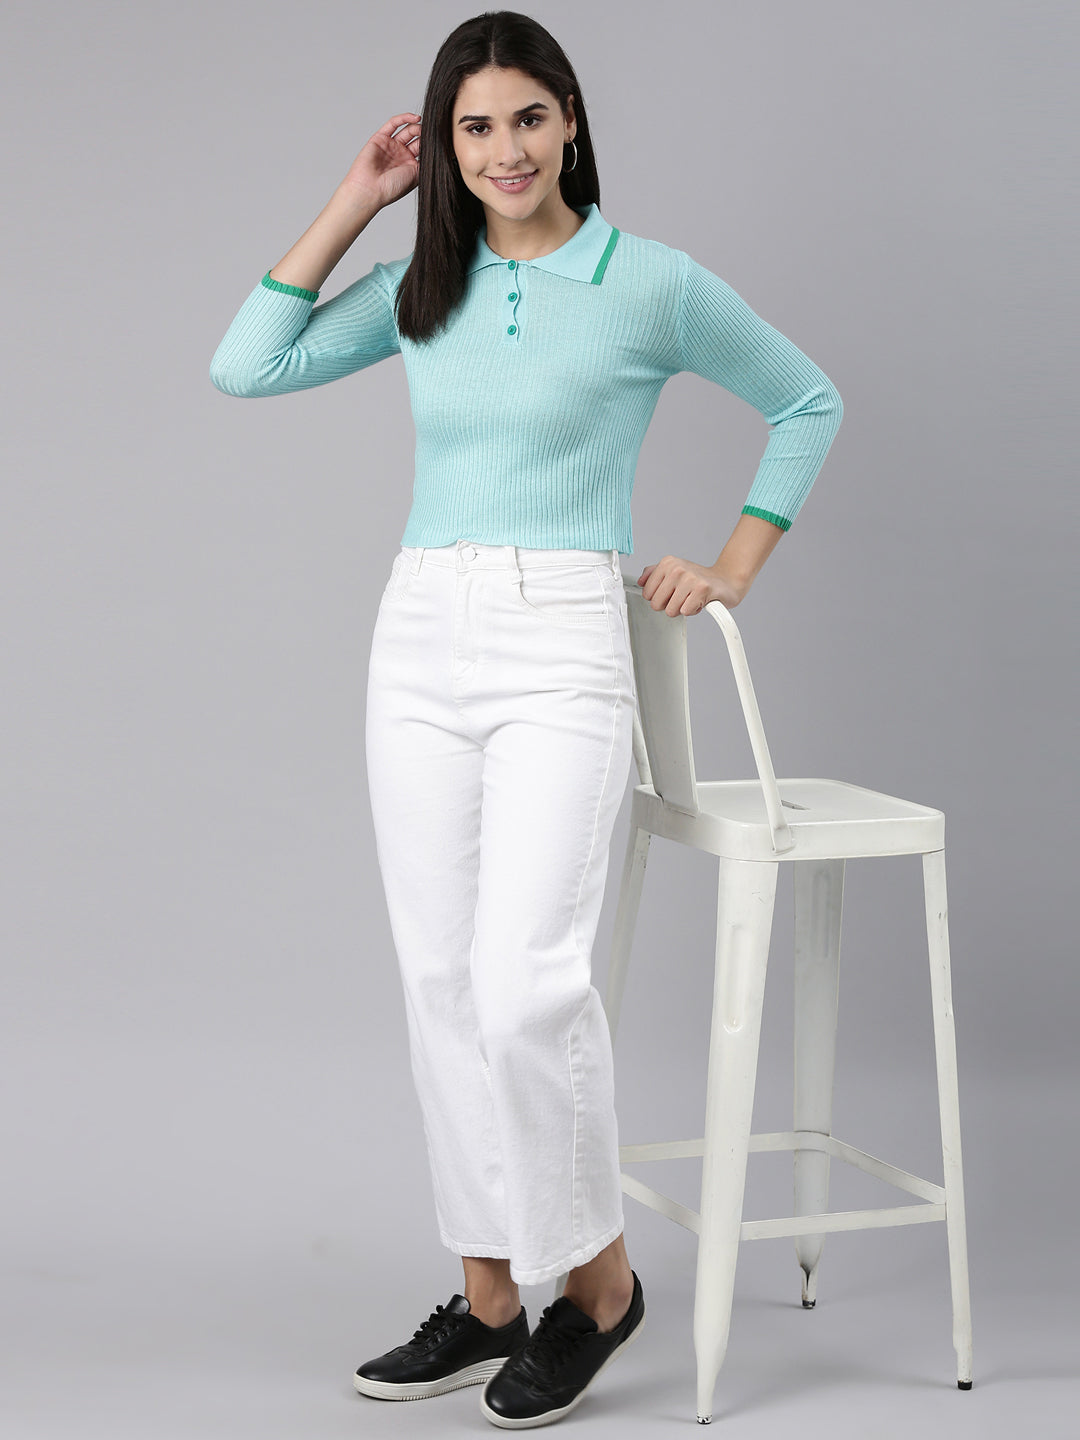 Above the Keyboard Collar Solid Regular Sleeves Fitted Turquoise Blue Regular Top